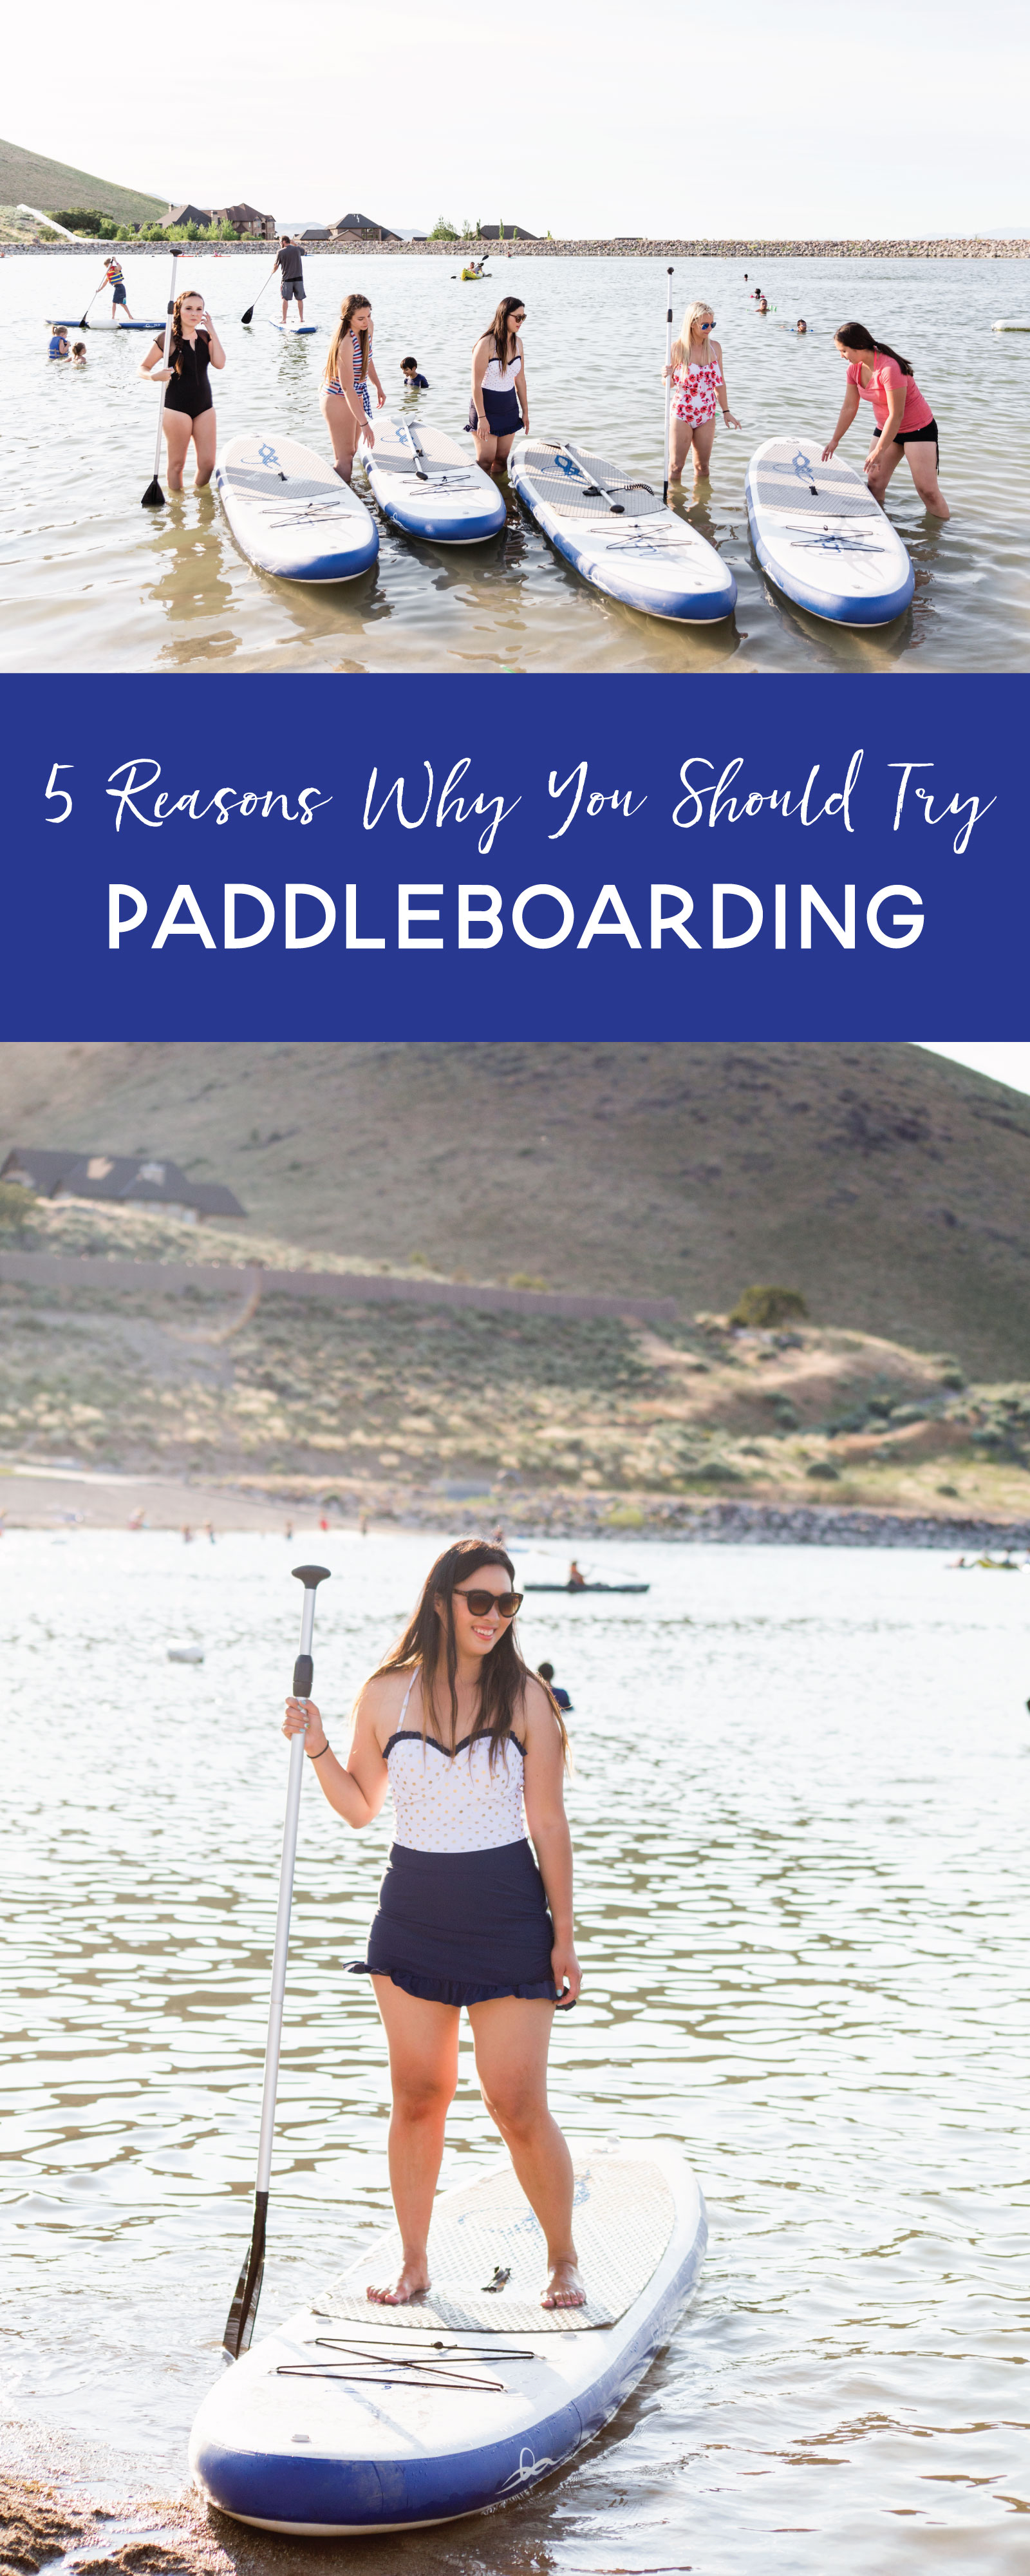 5-Reasons-Why-You-Should-Try-Paddleboarding